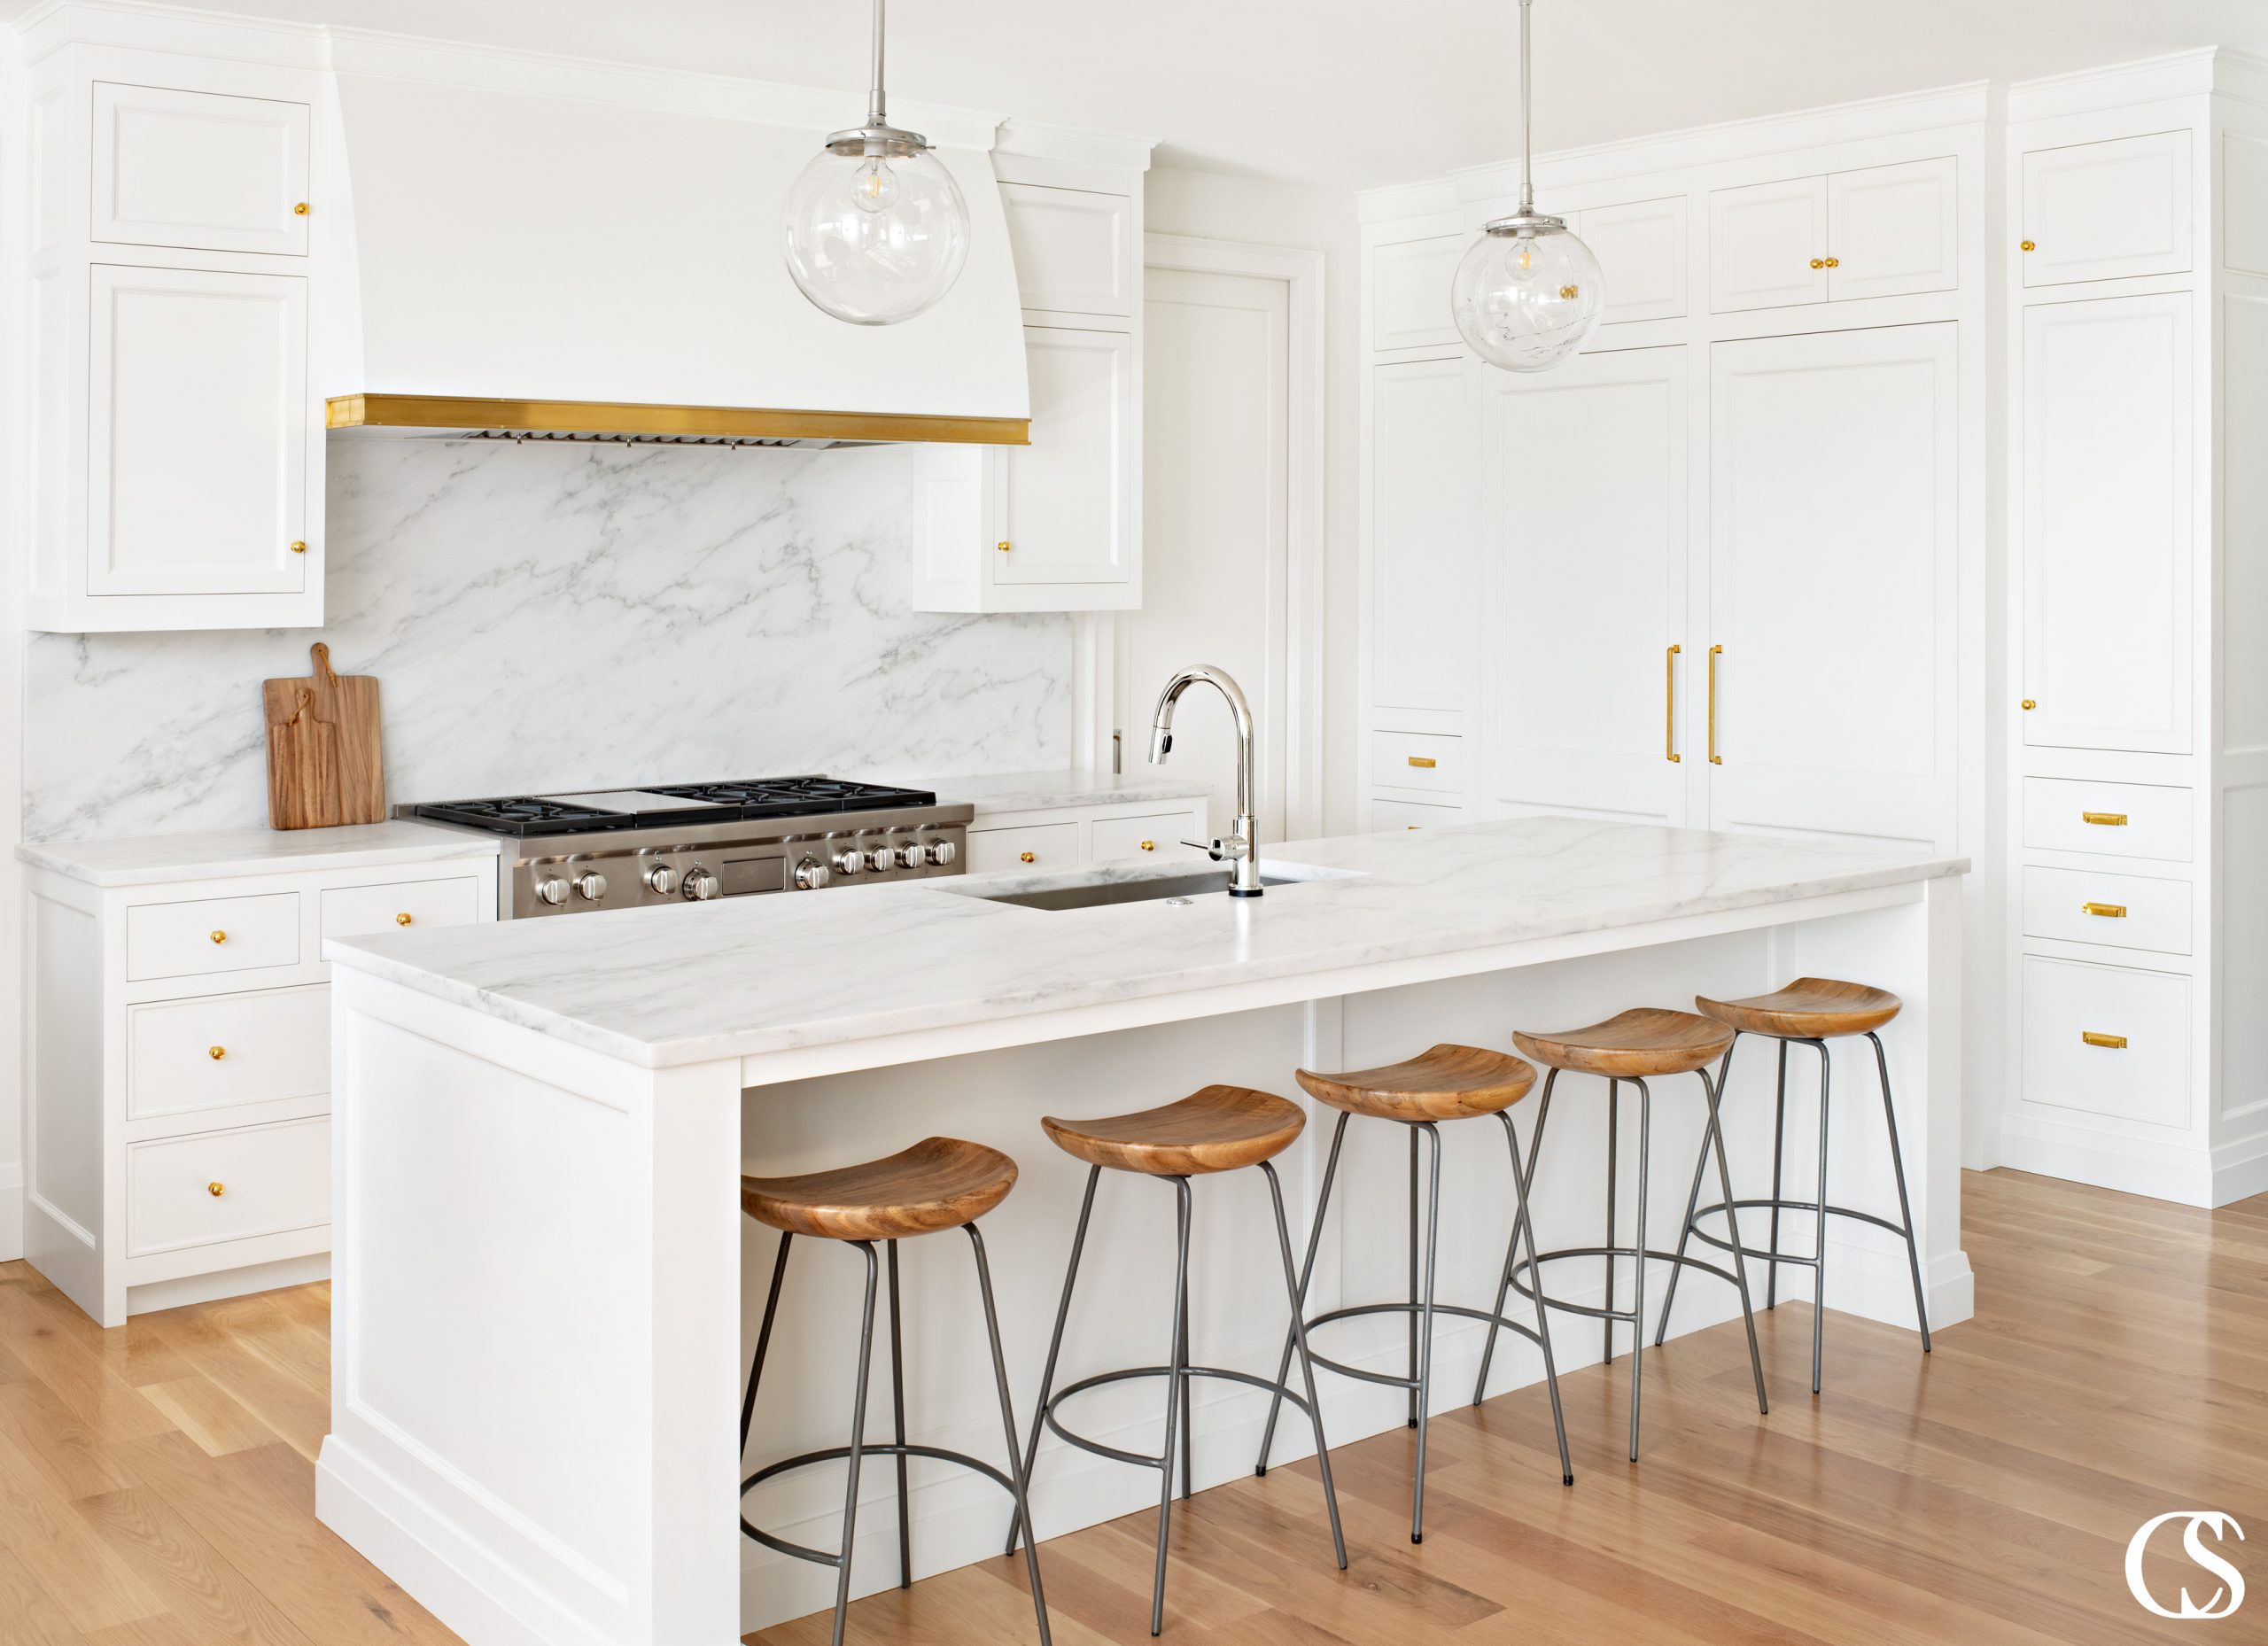 When it comes to kitchen island design ideas, there are as many options as there are dreams!